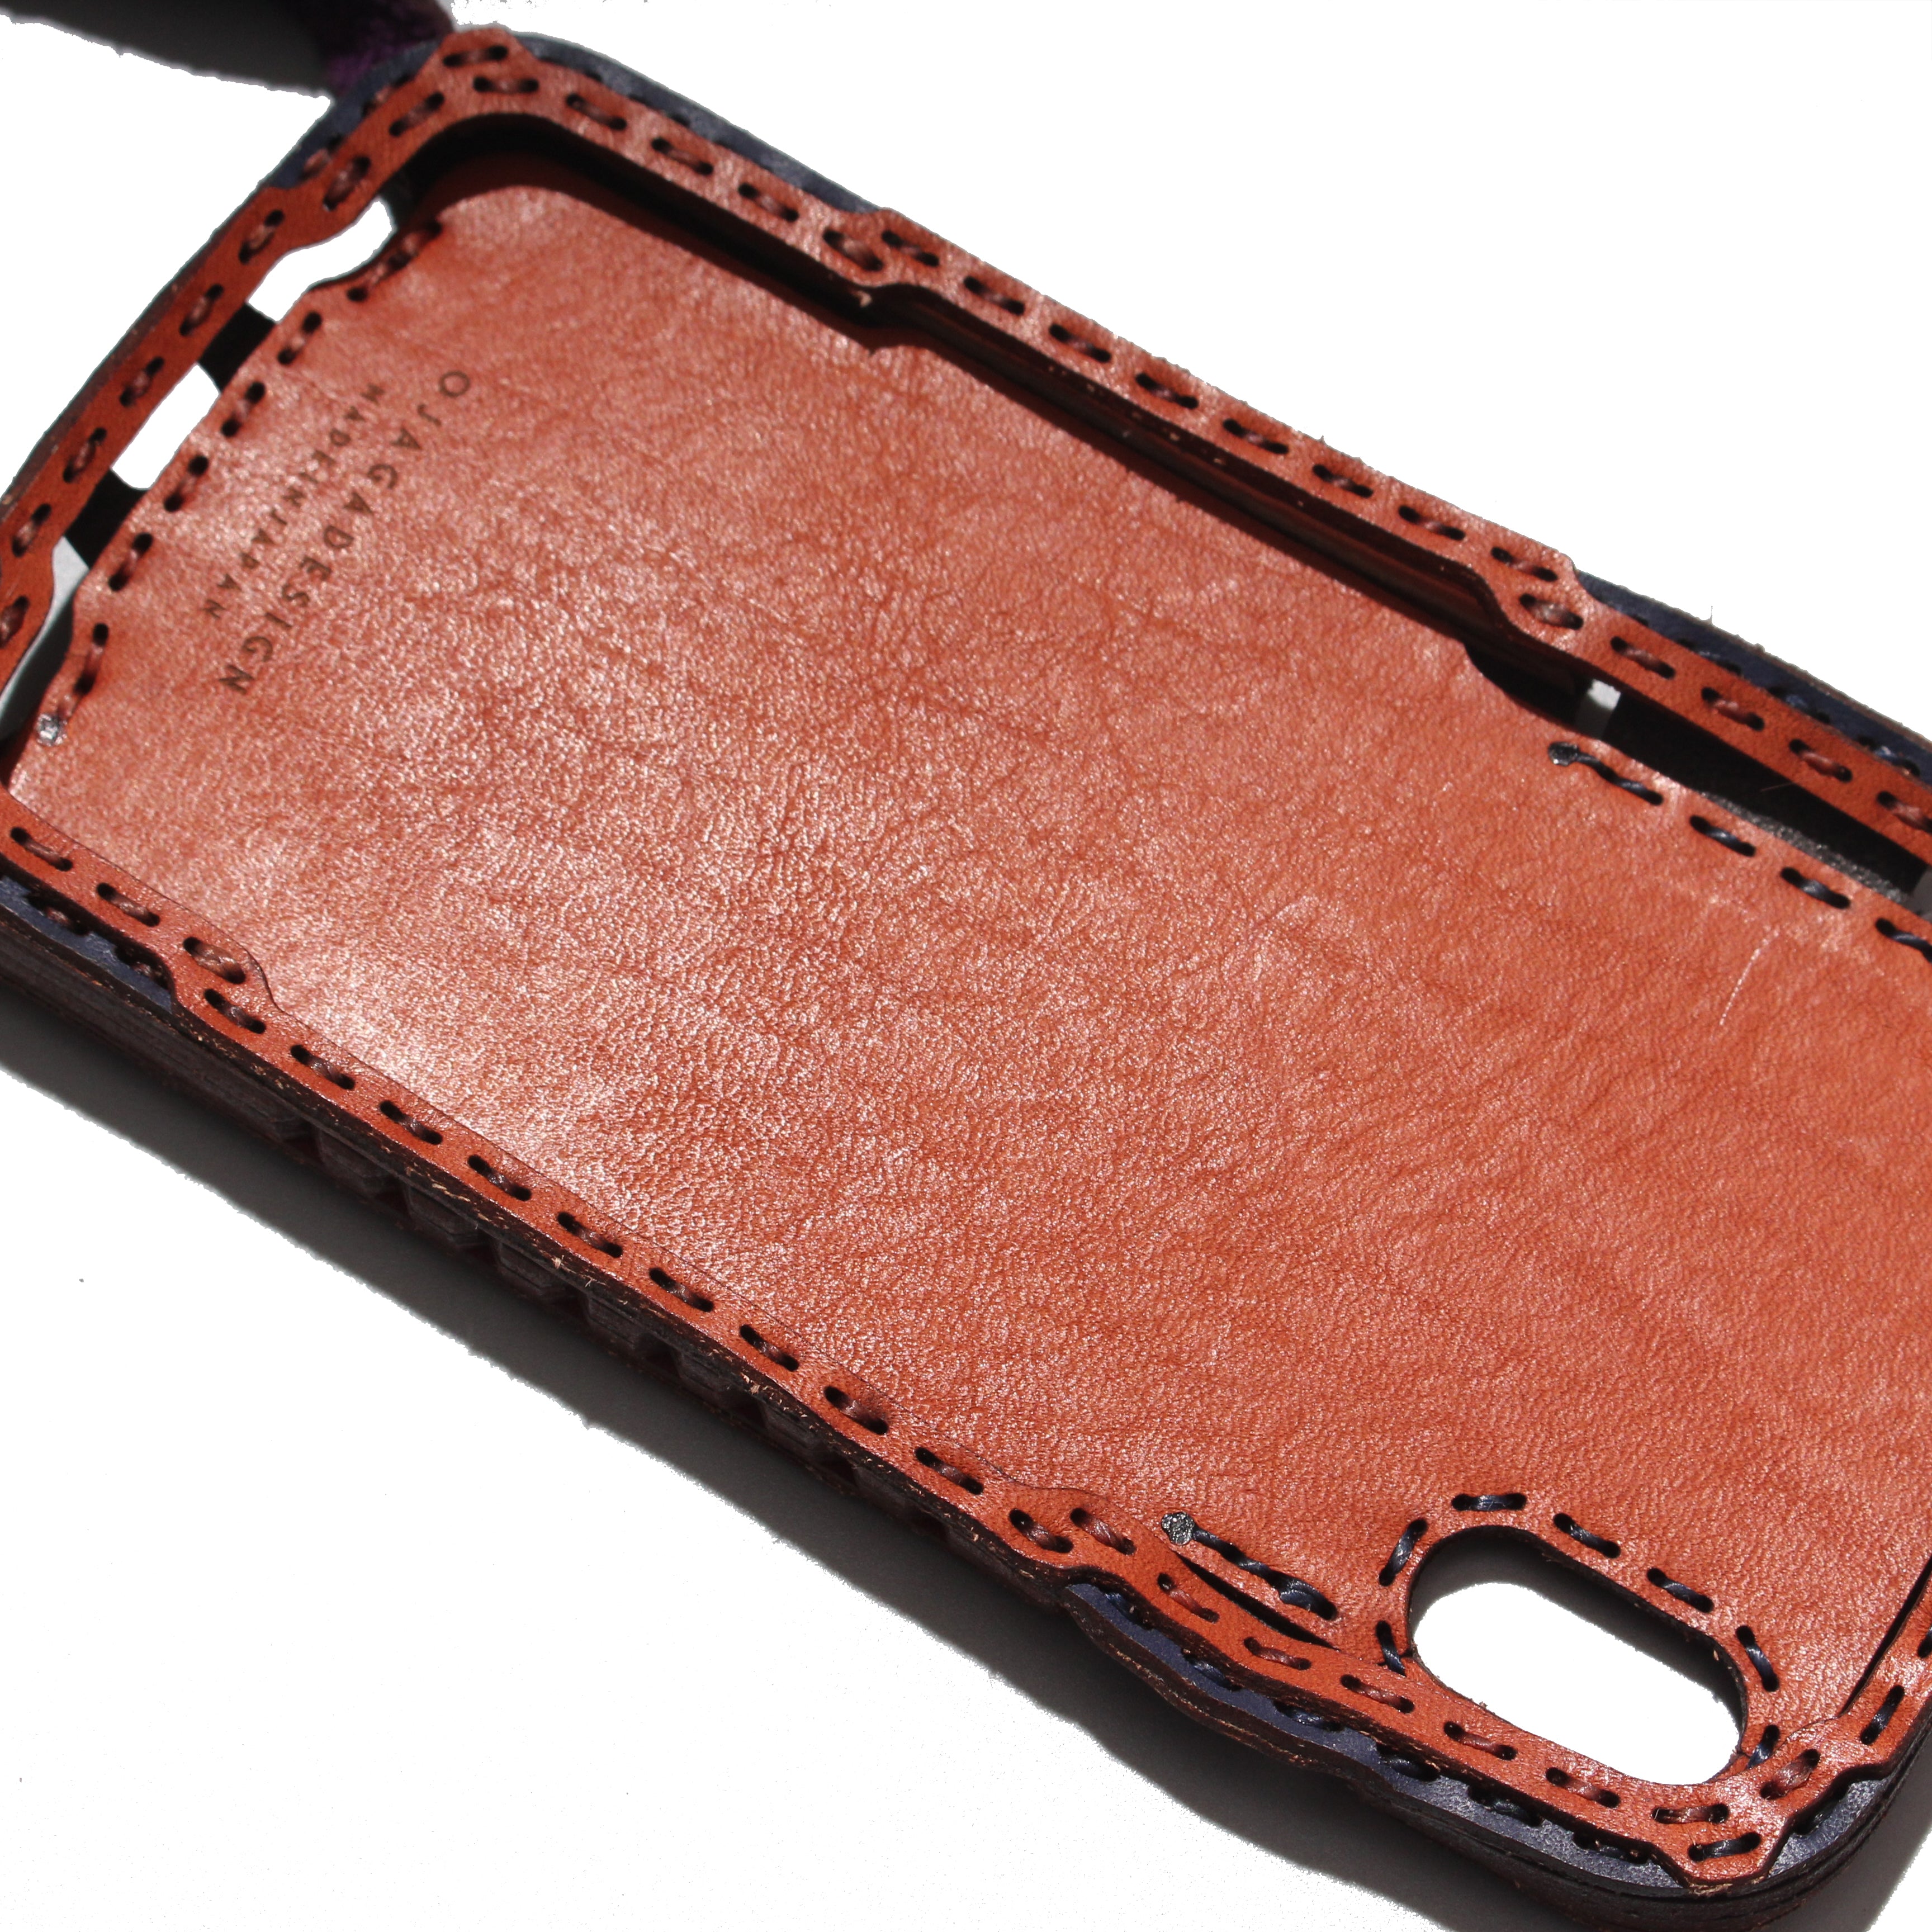 LEATHER PHONE CASE (for iPhone XS max)